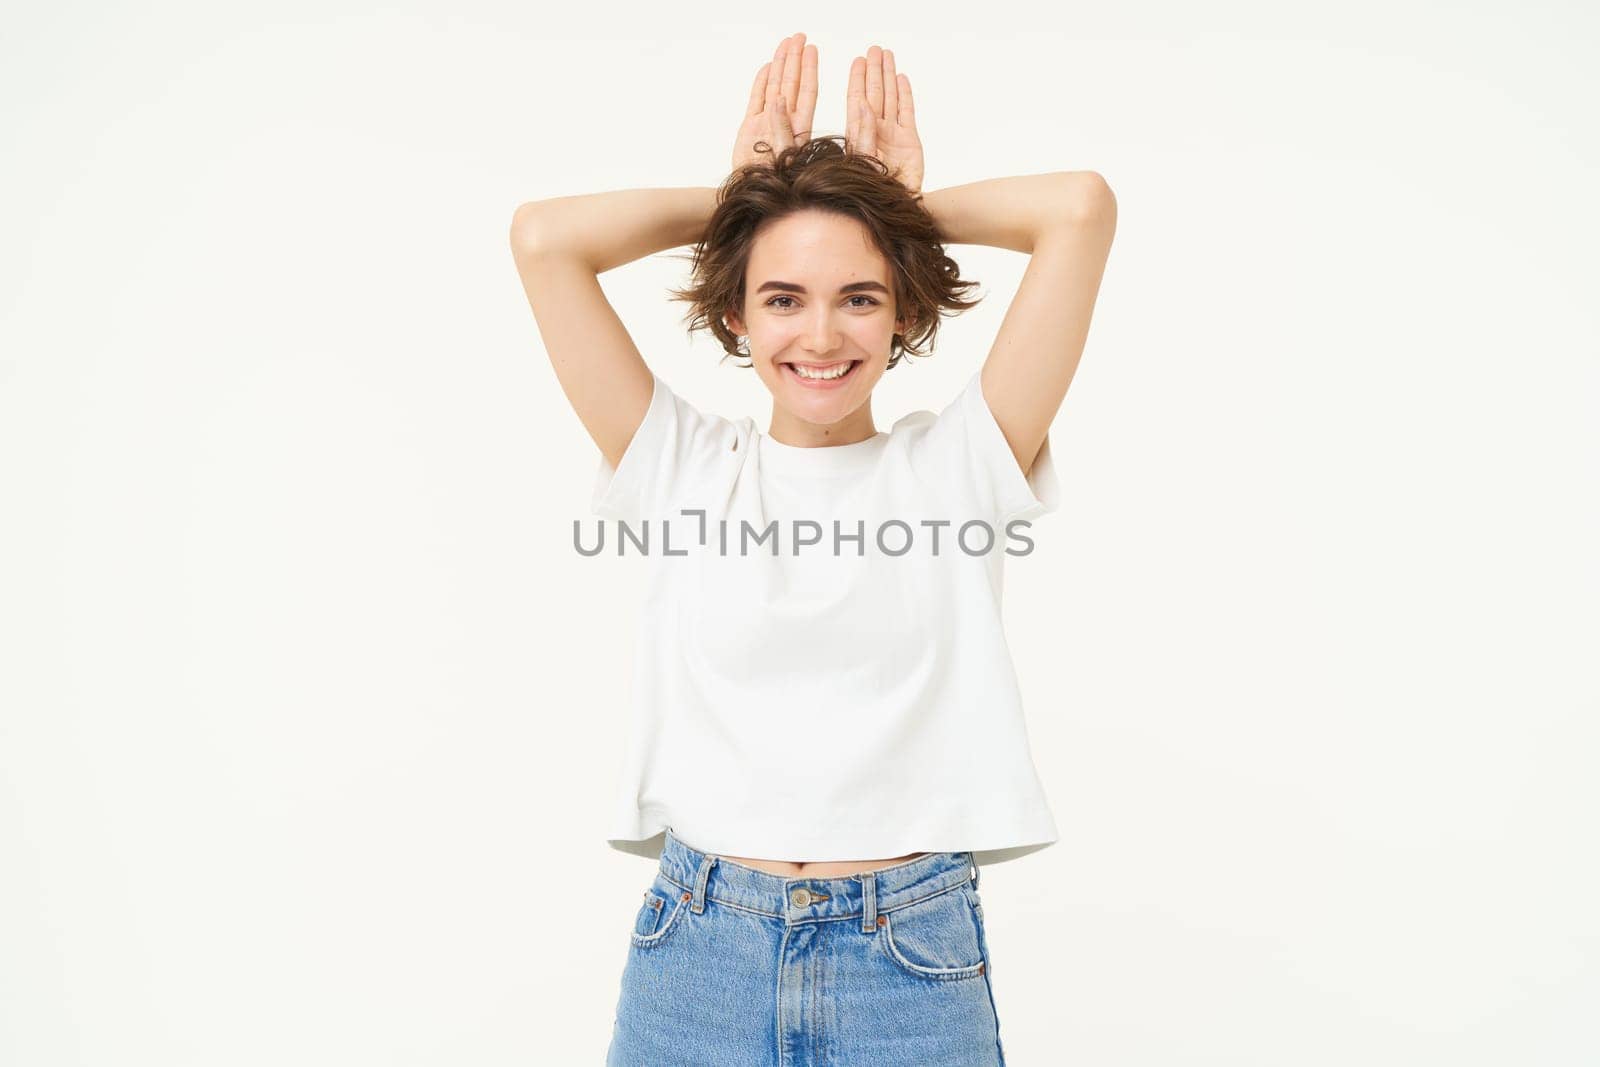 Portrait of funny and cute young woman with bunny ears gesture, holding palms on top of her head, smiling and looking happy at camera, standing over white background by Benzoix